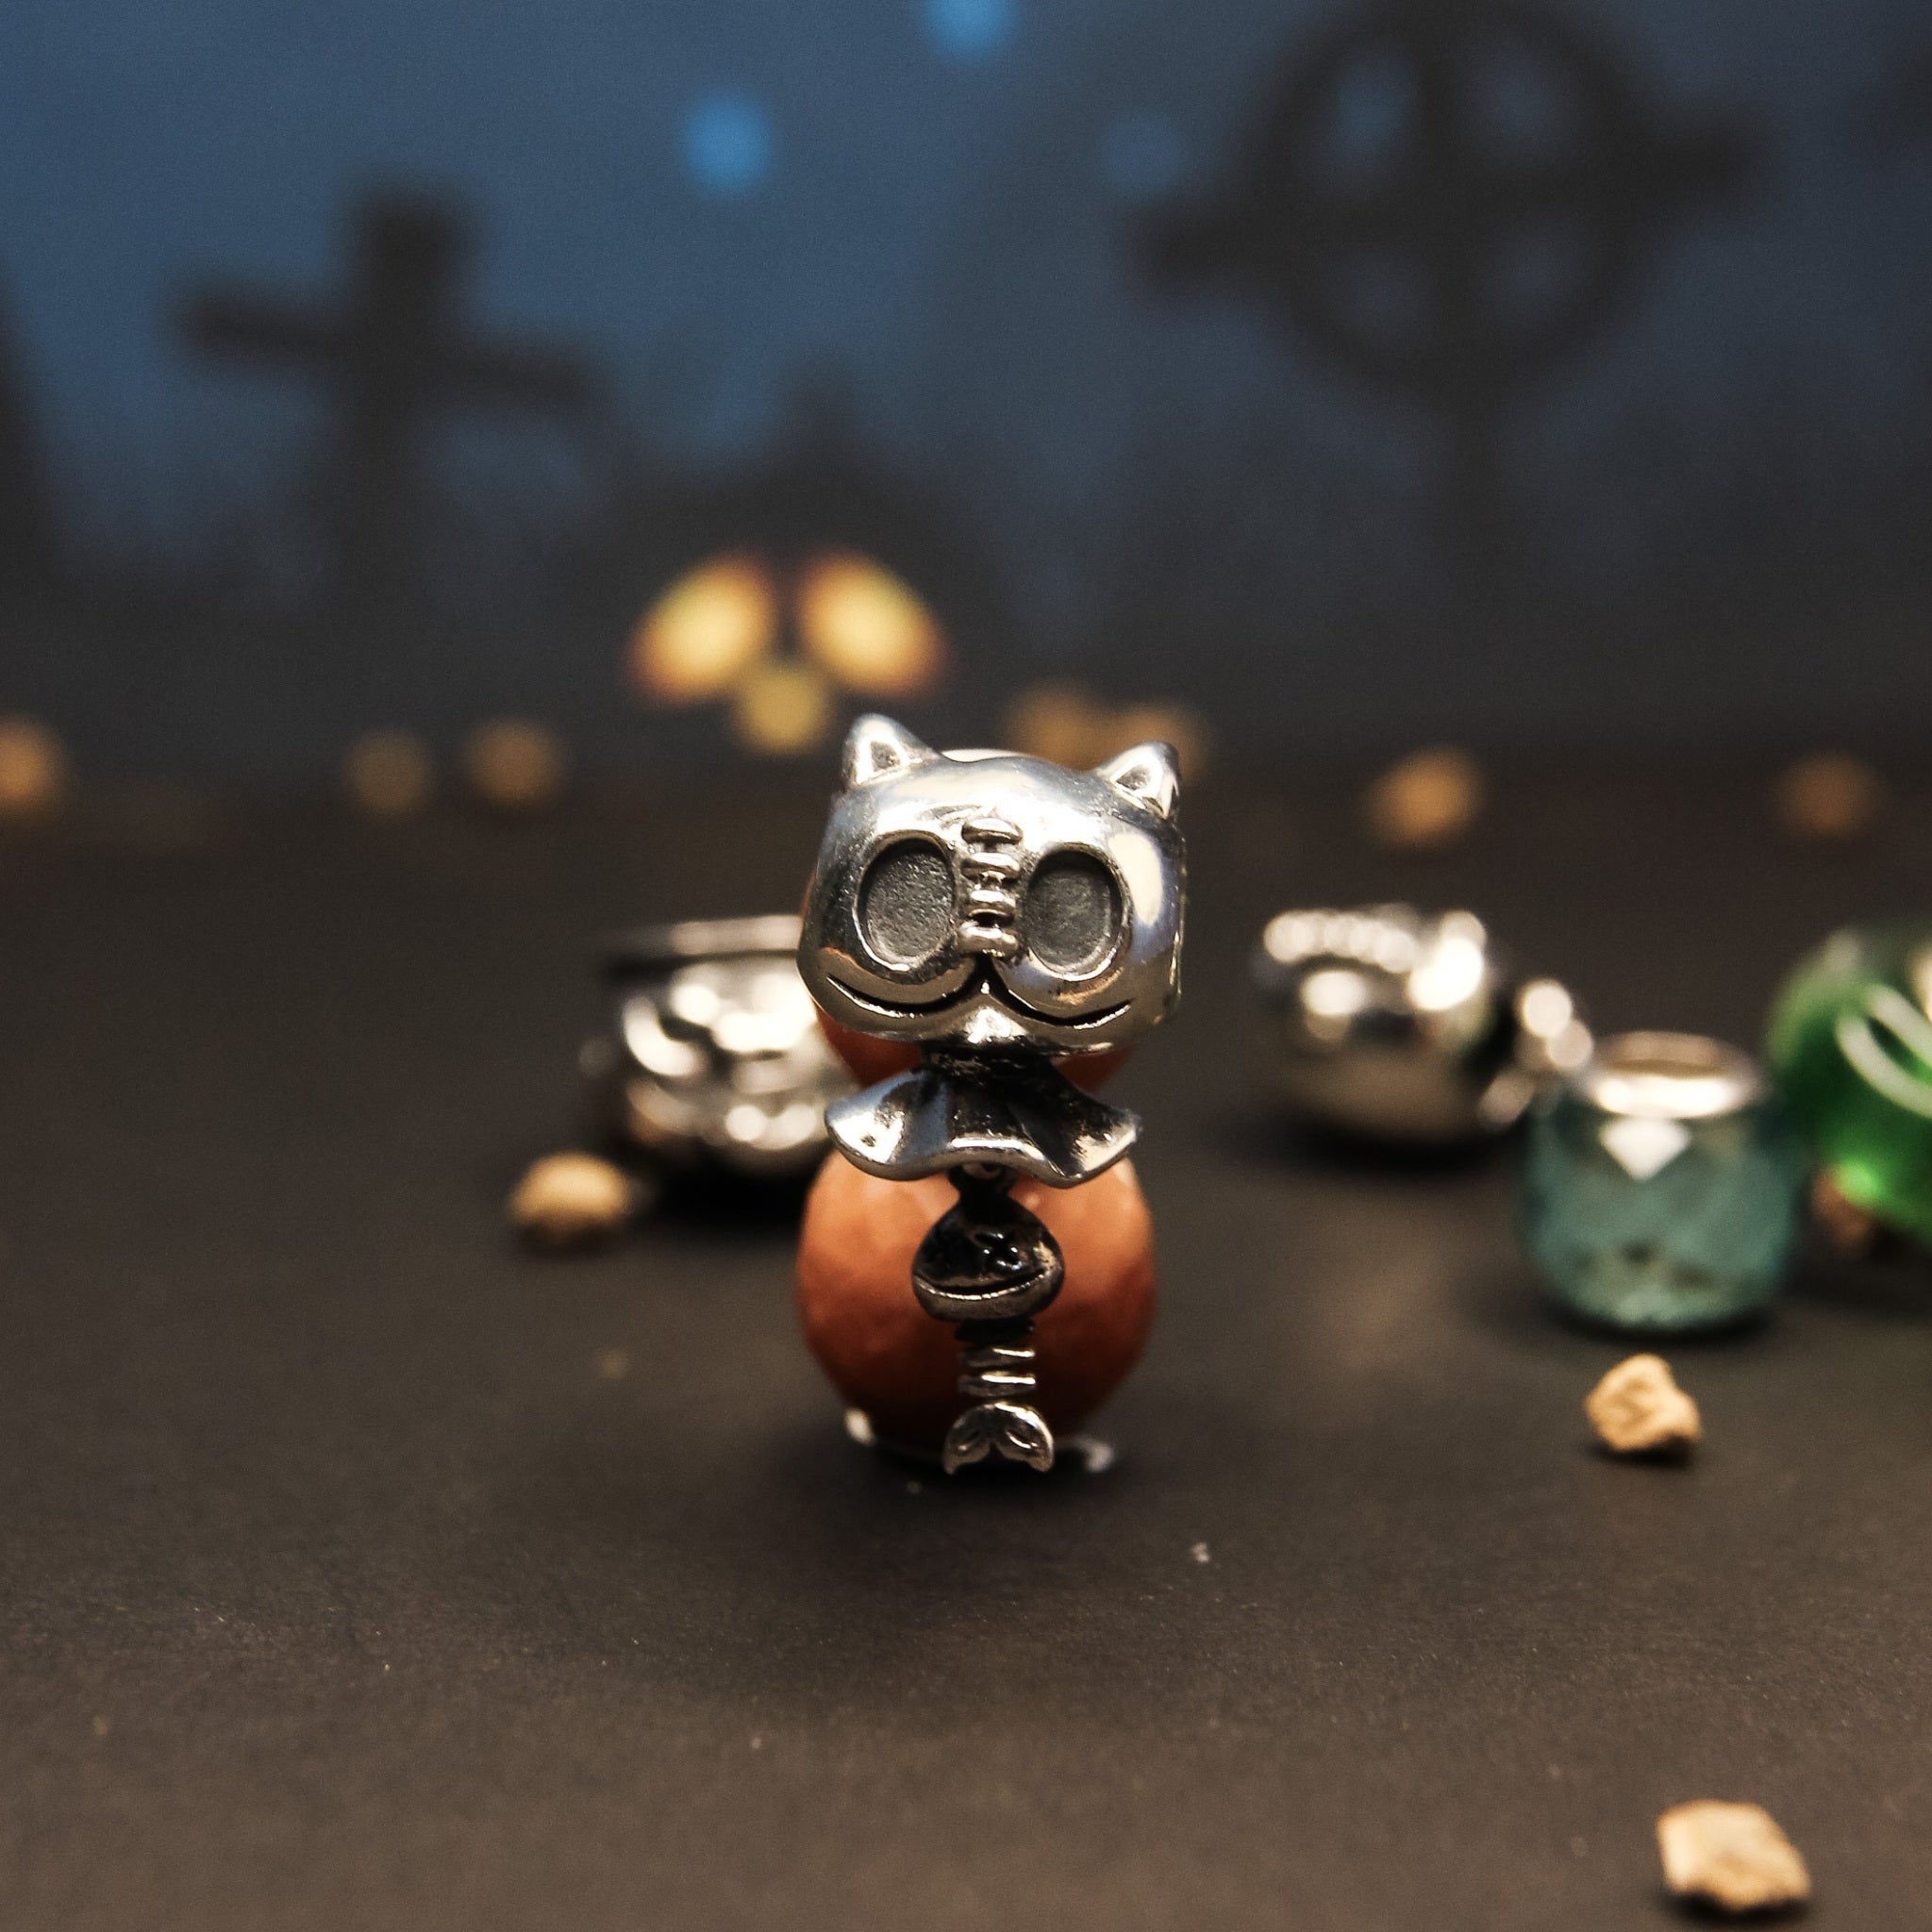 Mr. Whisker the Cat Ghost Bead